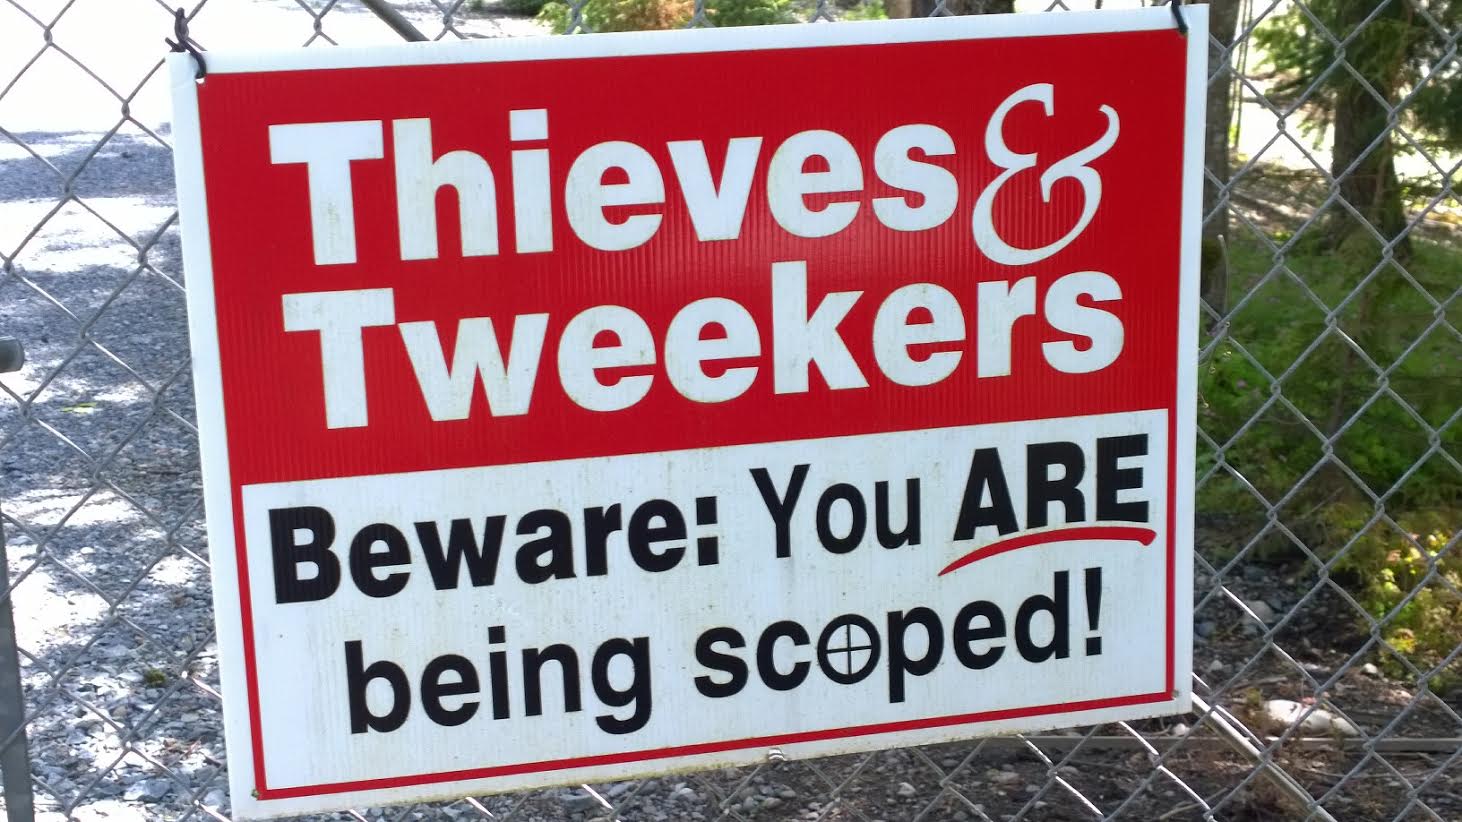 Thieves and Tweekers Beware!Photo by Morf Morford